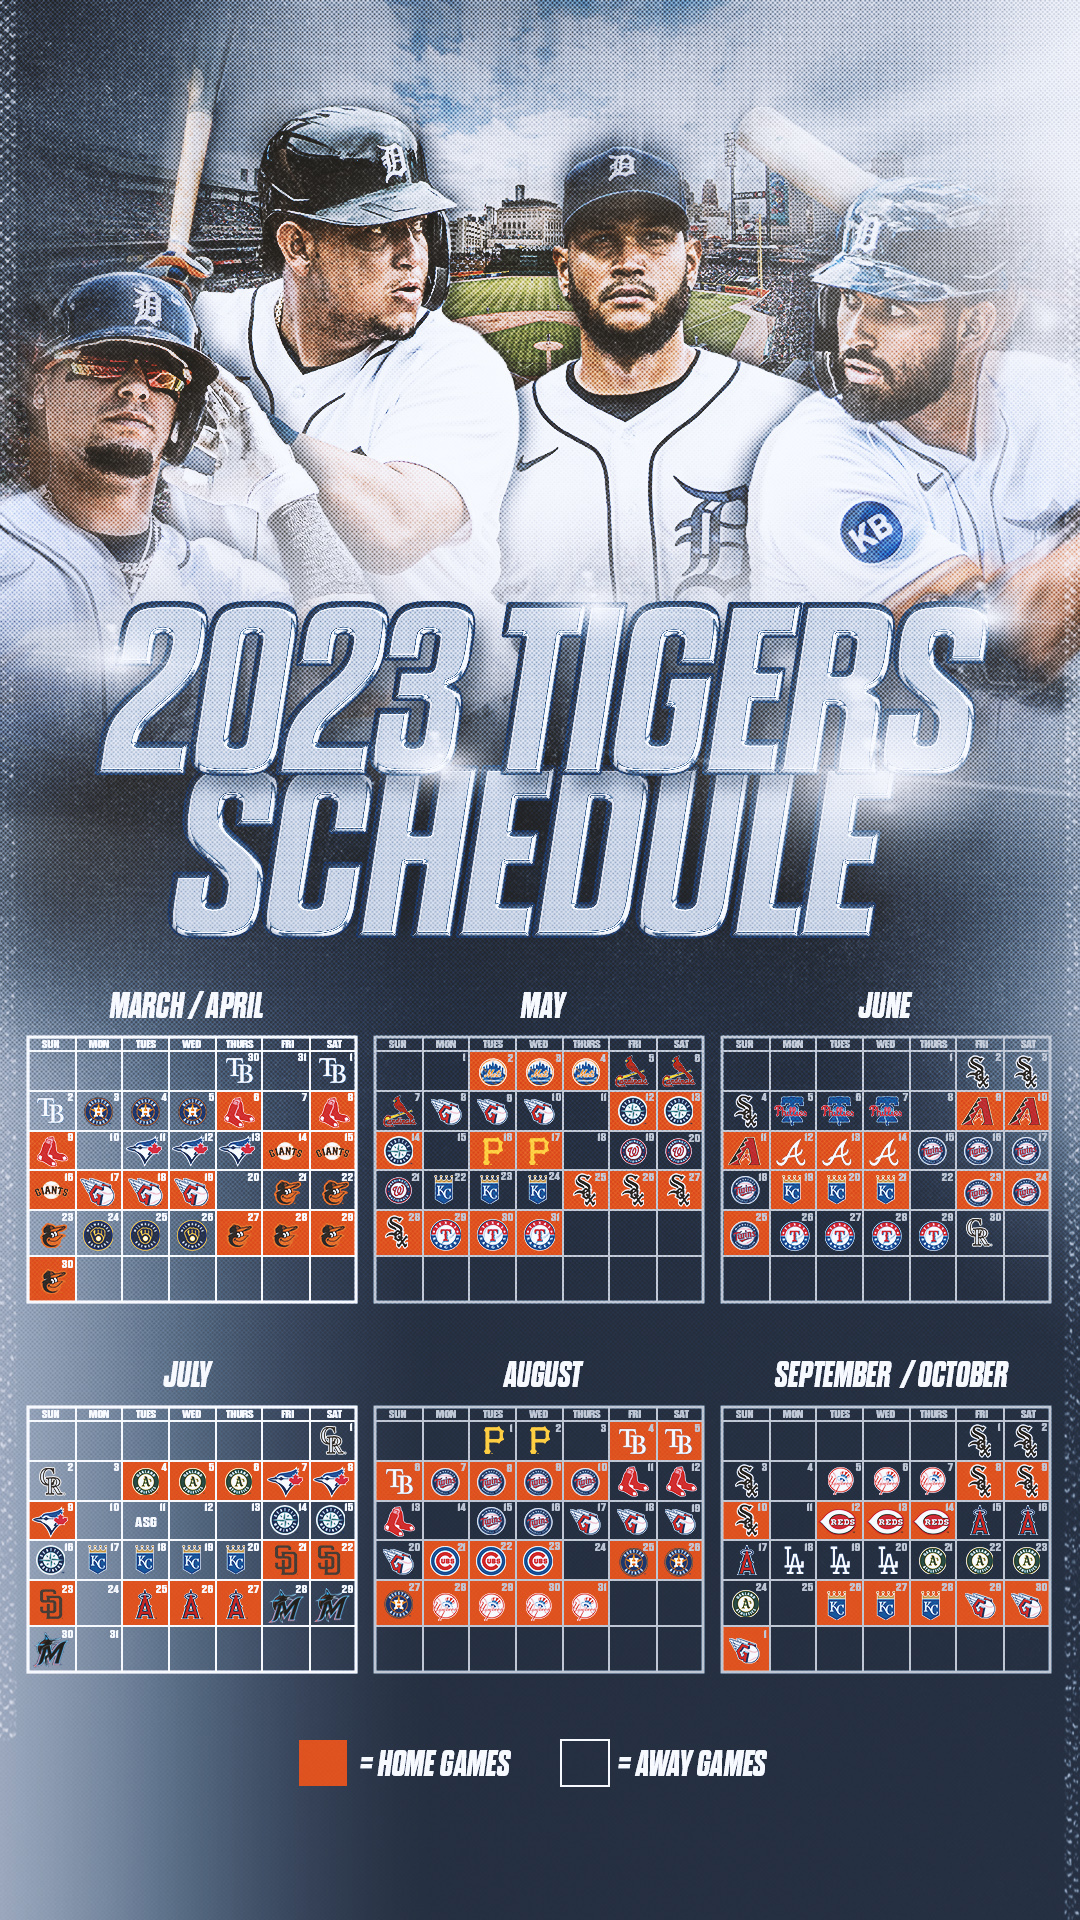 Detroit Tigers on Twitter "Mark your calendars! The 2023 Tigers